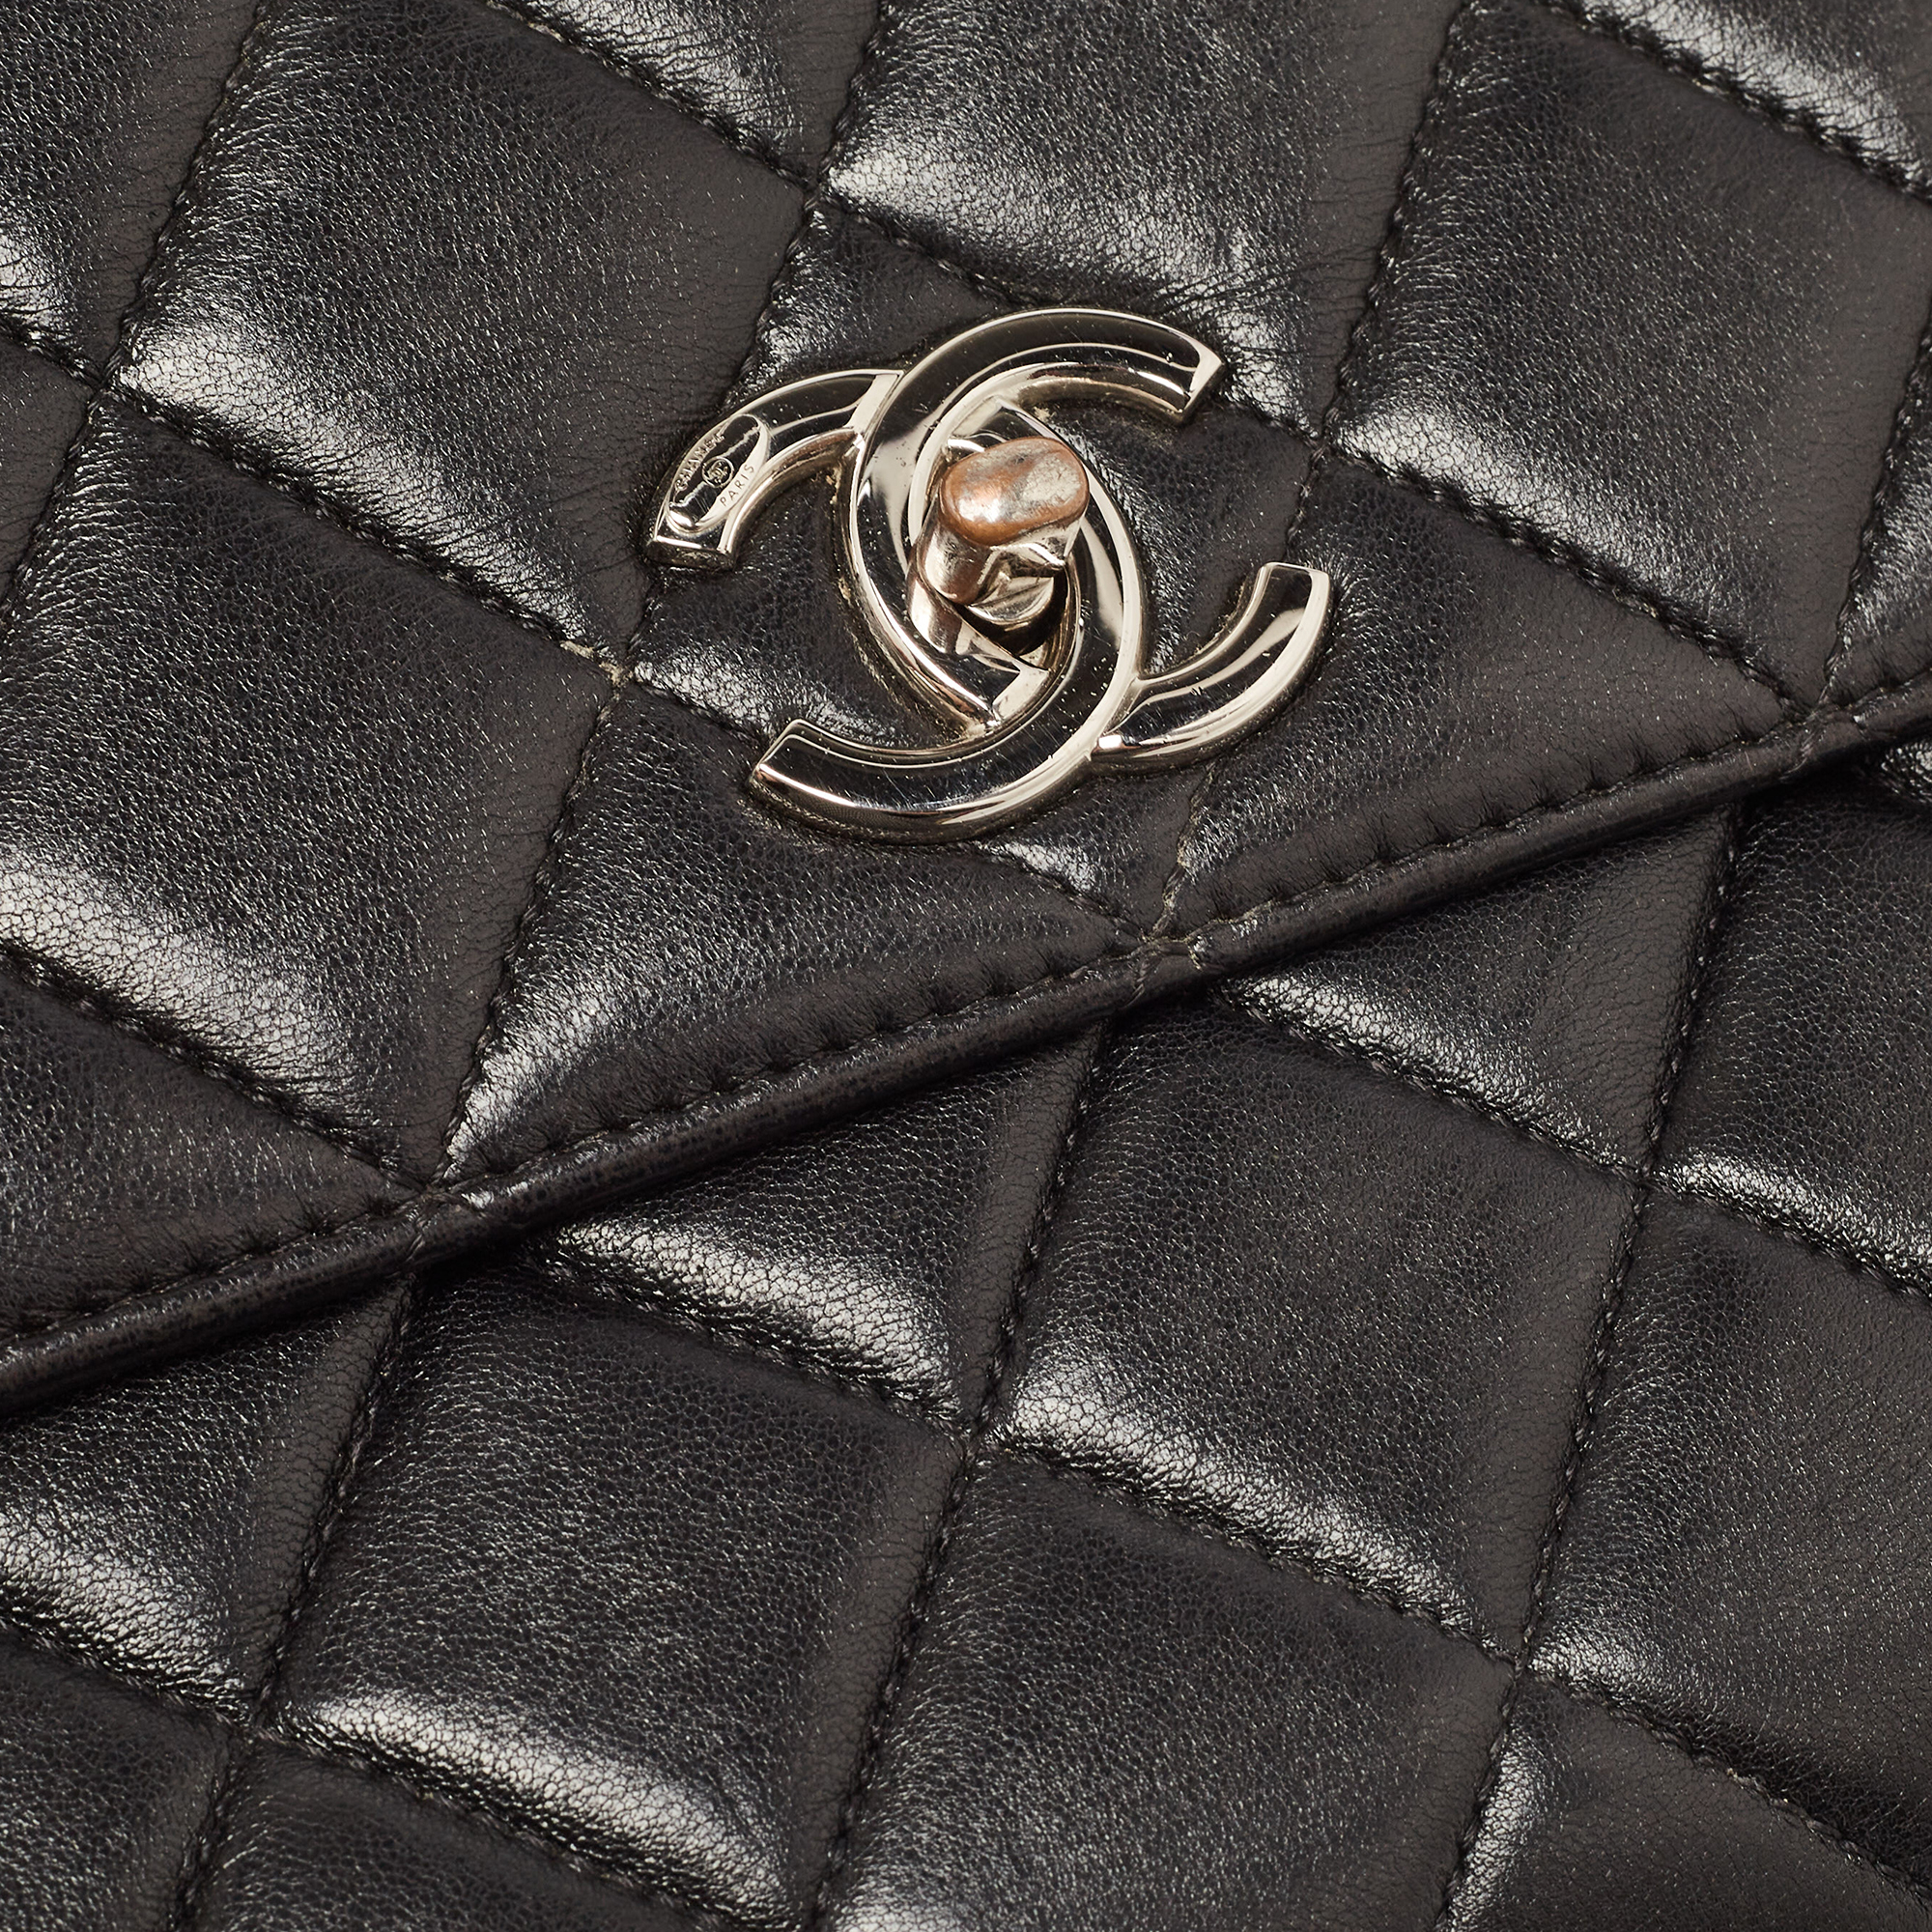 Chanel Black Quilted Leather Small Trendy CC Flap Top Handle Bag